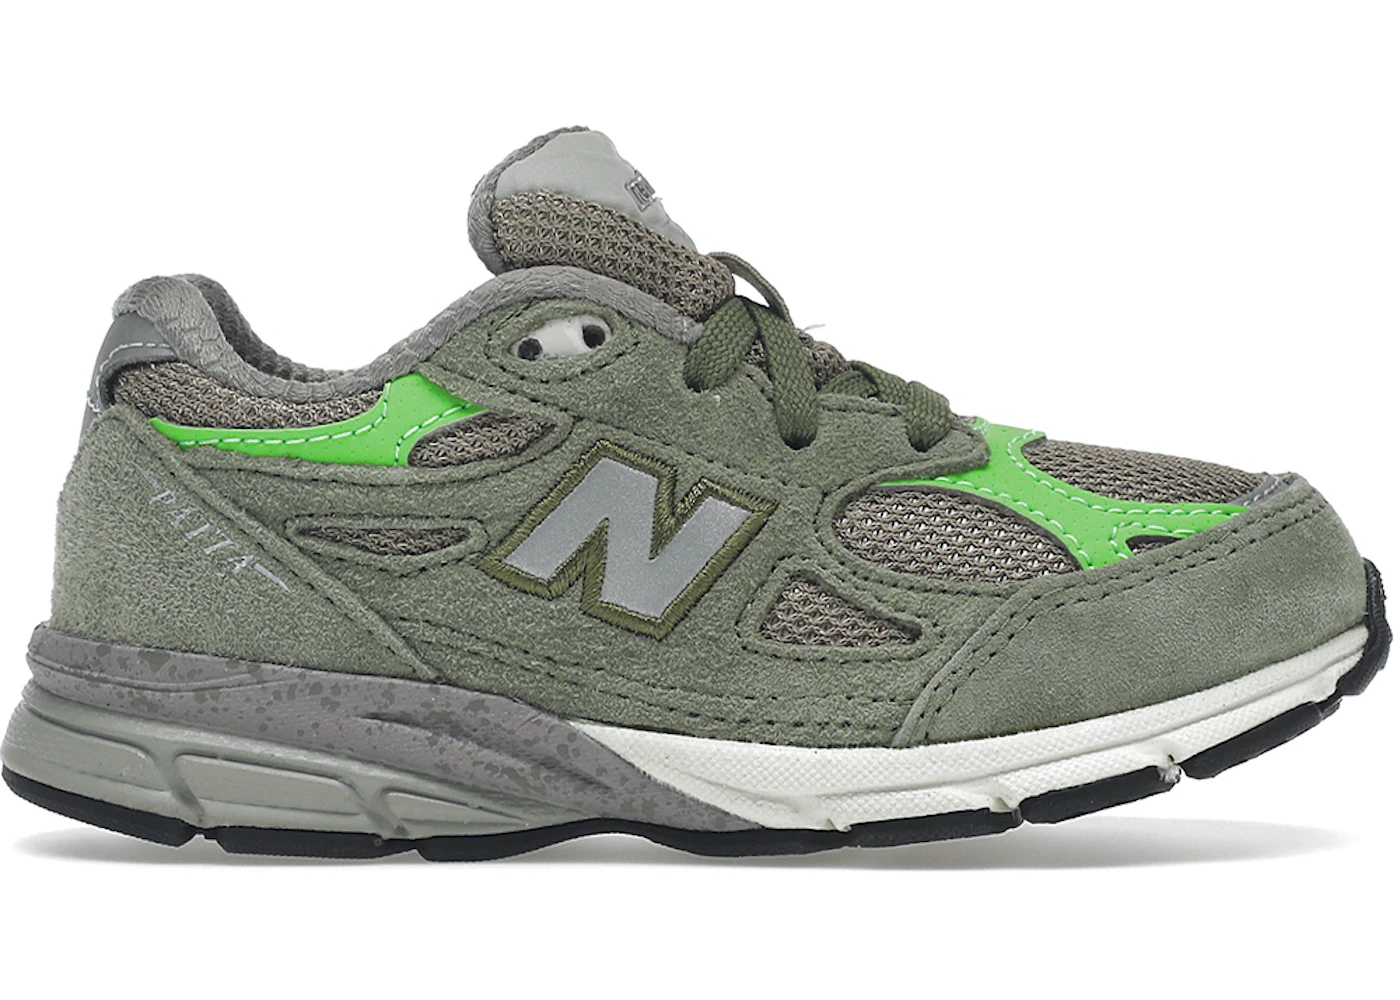 New Balance 990v3 Patta Keep Your Family Close (TD) Toddler - IC990PP3 - US